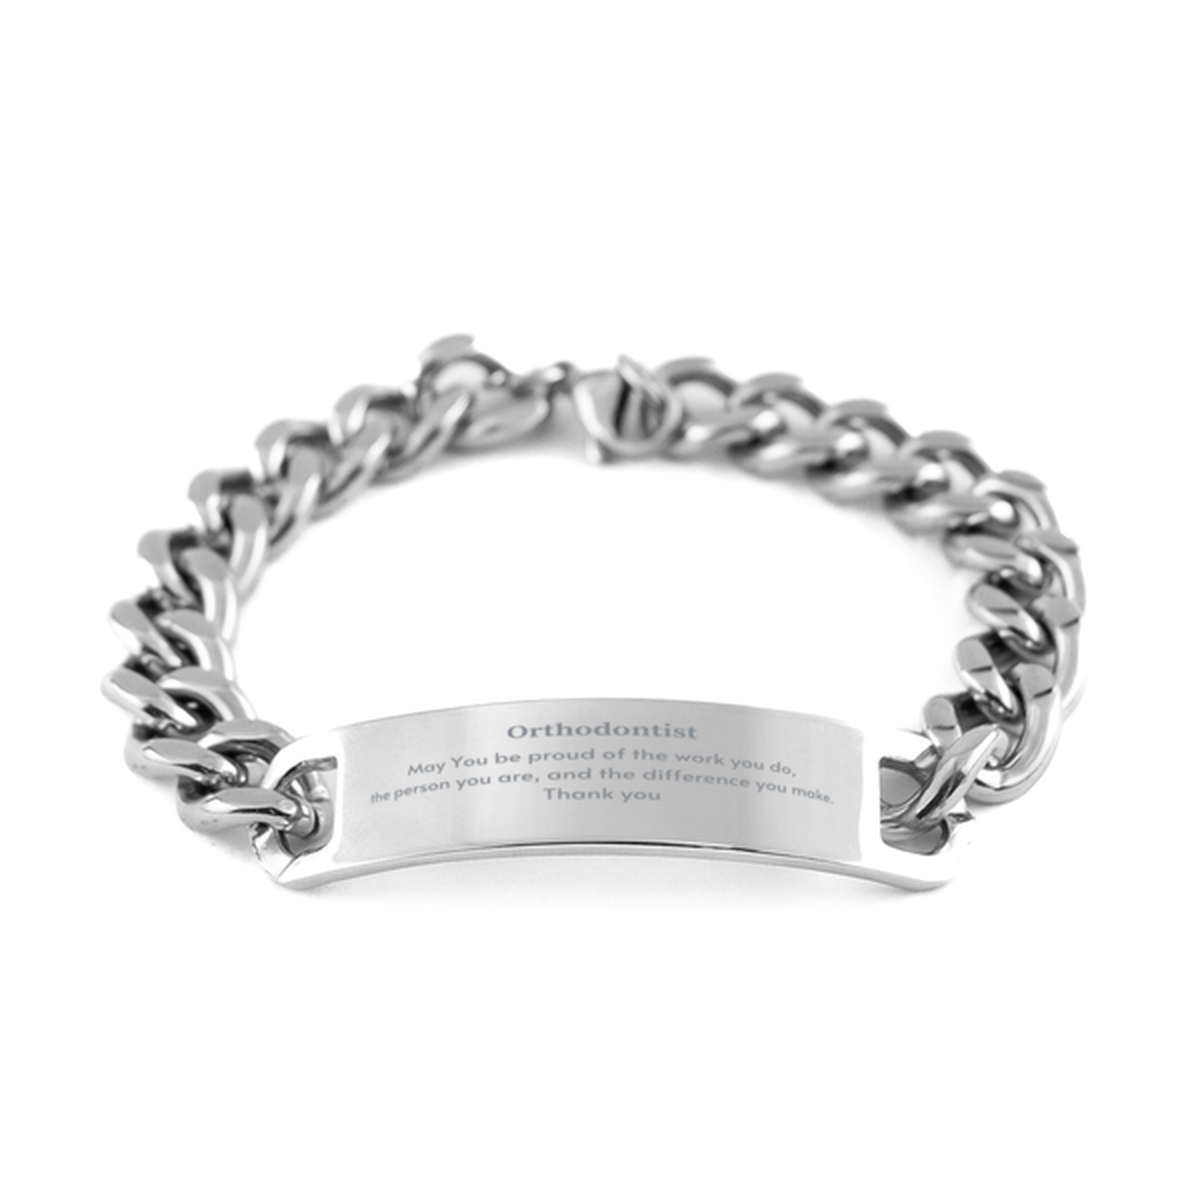 Heartwarming Cuban Chain Stainless Steel Bracelet Retirement Coworkers Gifts for Orthodontist, Orthodontist May You be proud of the work you do, the person you are Gifts for Boss Men Women Friends